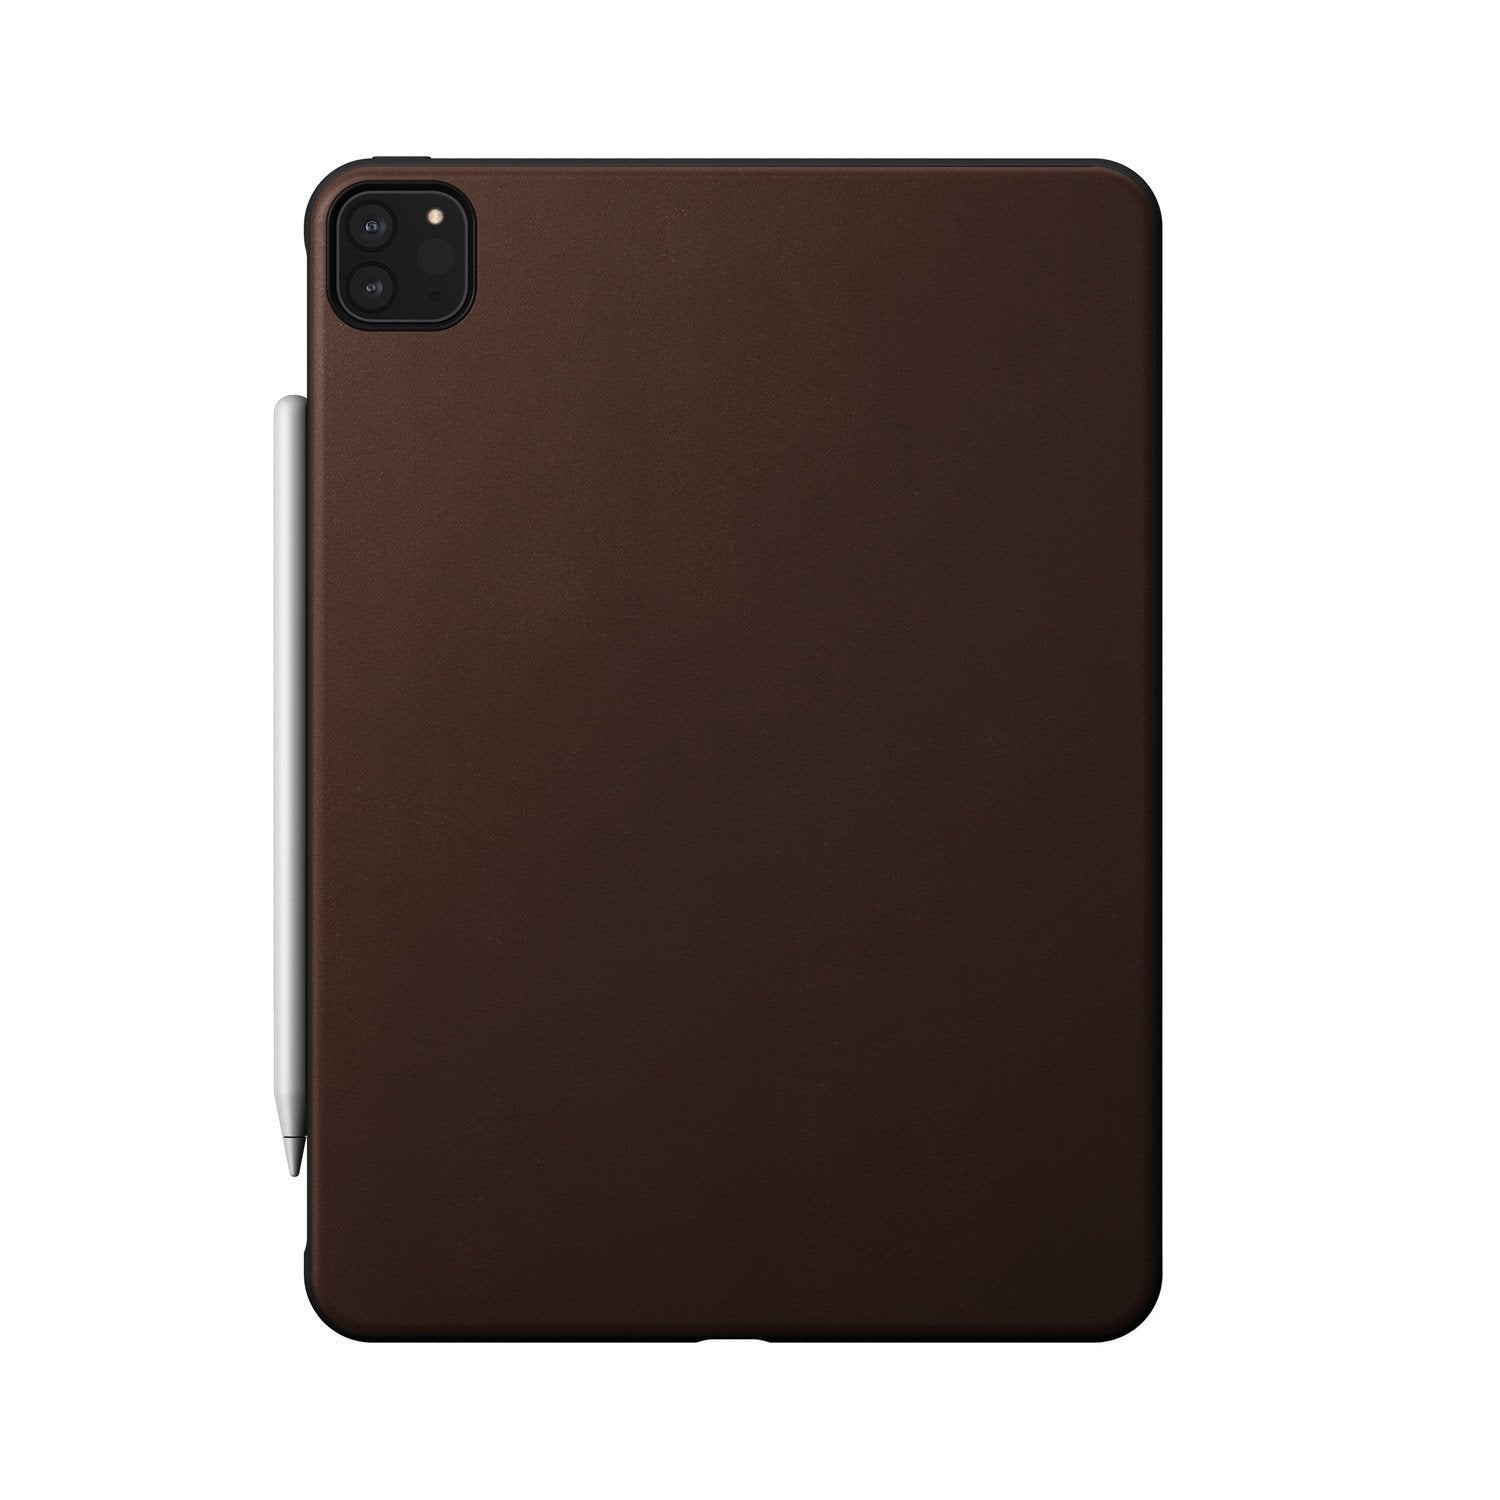 NOMAD Rugged Horween Leather Case for iPad Pro 11"(2020), Rustic Brown Default NOMAD 